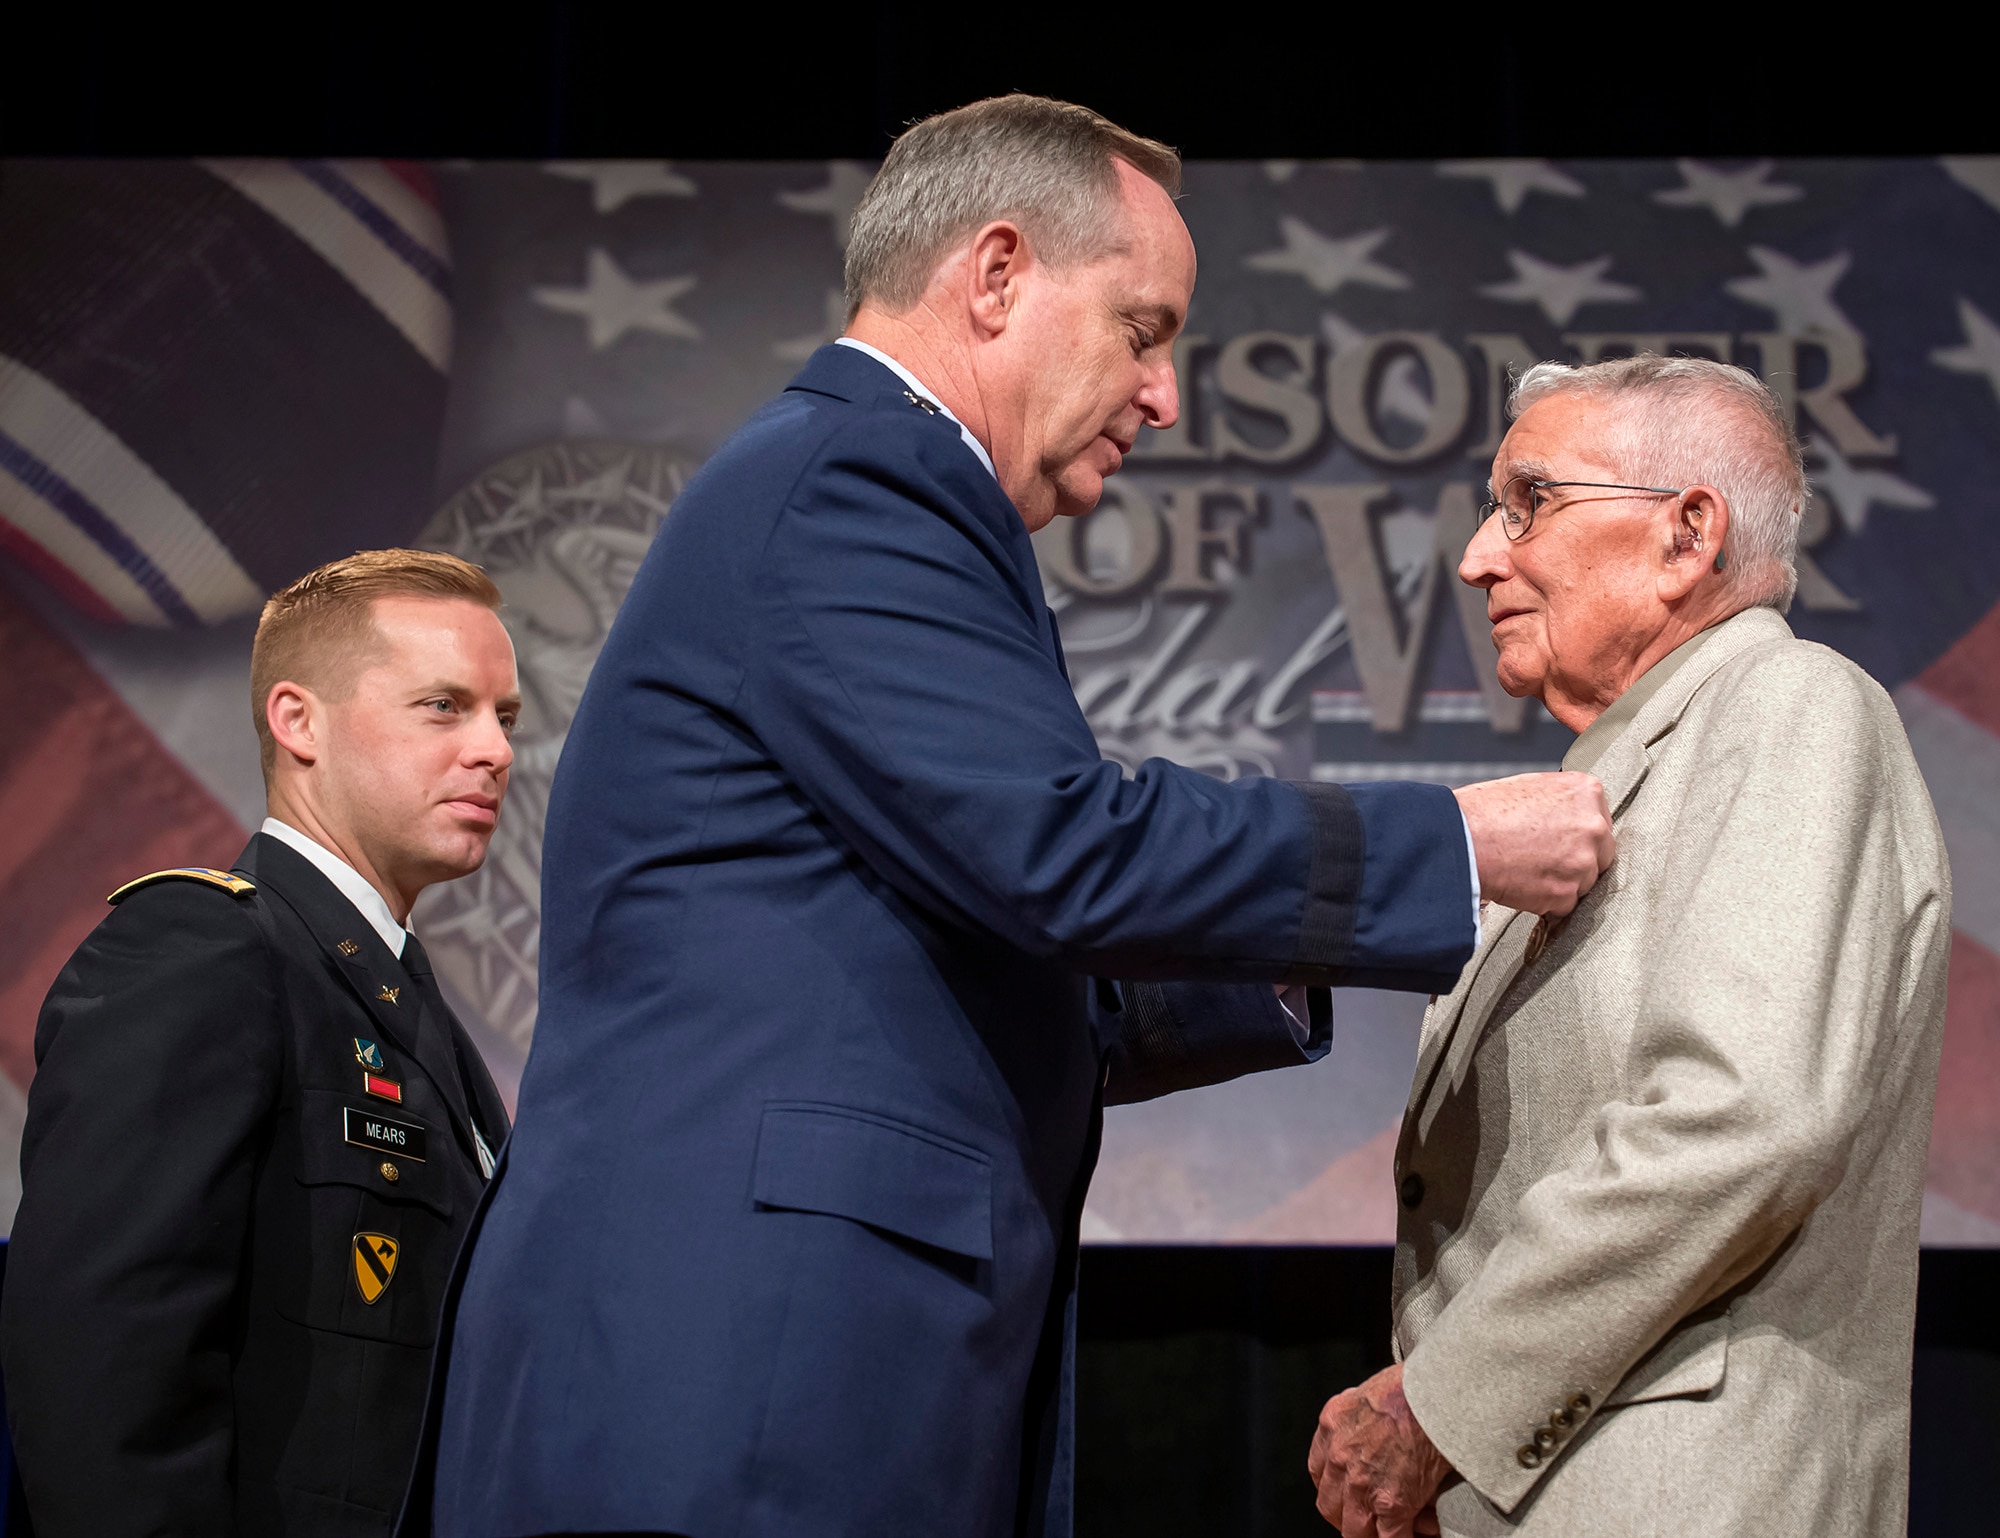 Air Force Chief of Staff Gen. Mark A. Welsh III presented the  Prisoner of War Medal to 1st Lt. Paul Gambaiana during a ceremony April 30, 2014, at the Pentagon. Gambaiana and eight other aviators, all bomber crew members, were shot down flying missions over Germany and were held in a prison camp in Wauwilermoos, Switzerland. The men were originally denied POW status. Then Acting Secretary of the Air Force Eric Fanning authorized the medal for 143 Army Air Corps Airmen in October 2013. (U.S. Air Force photo/Jim Varhegyi)